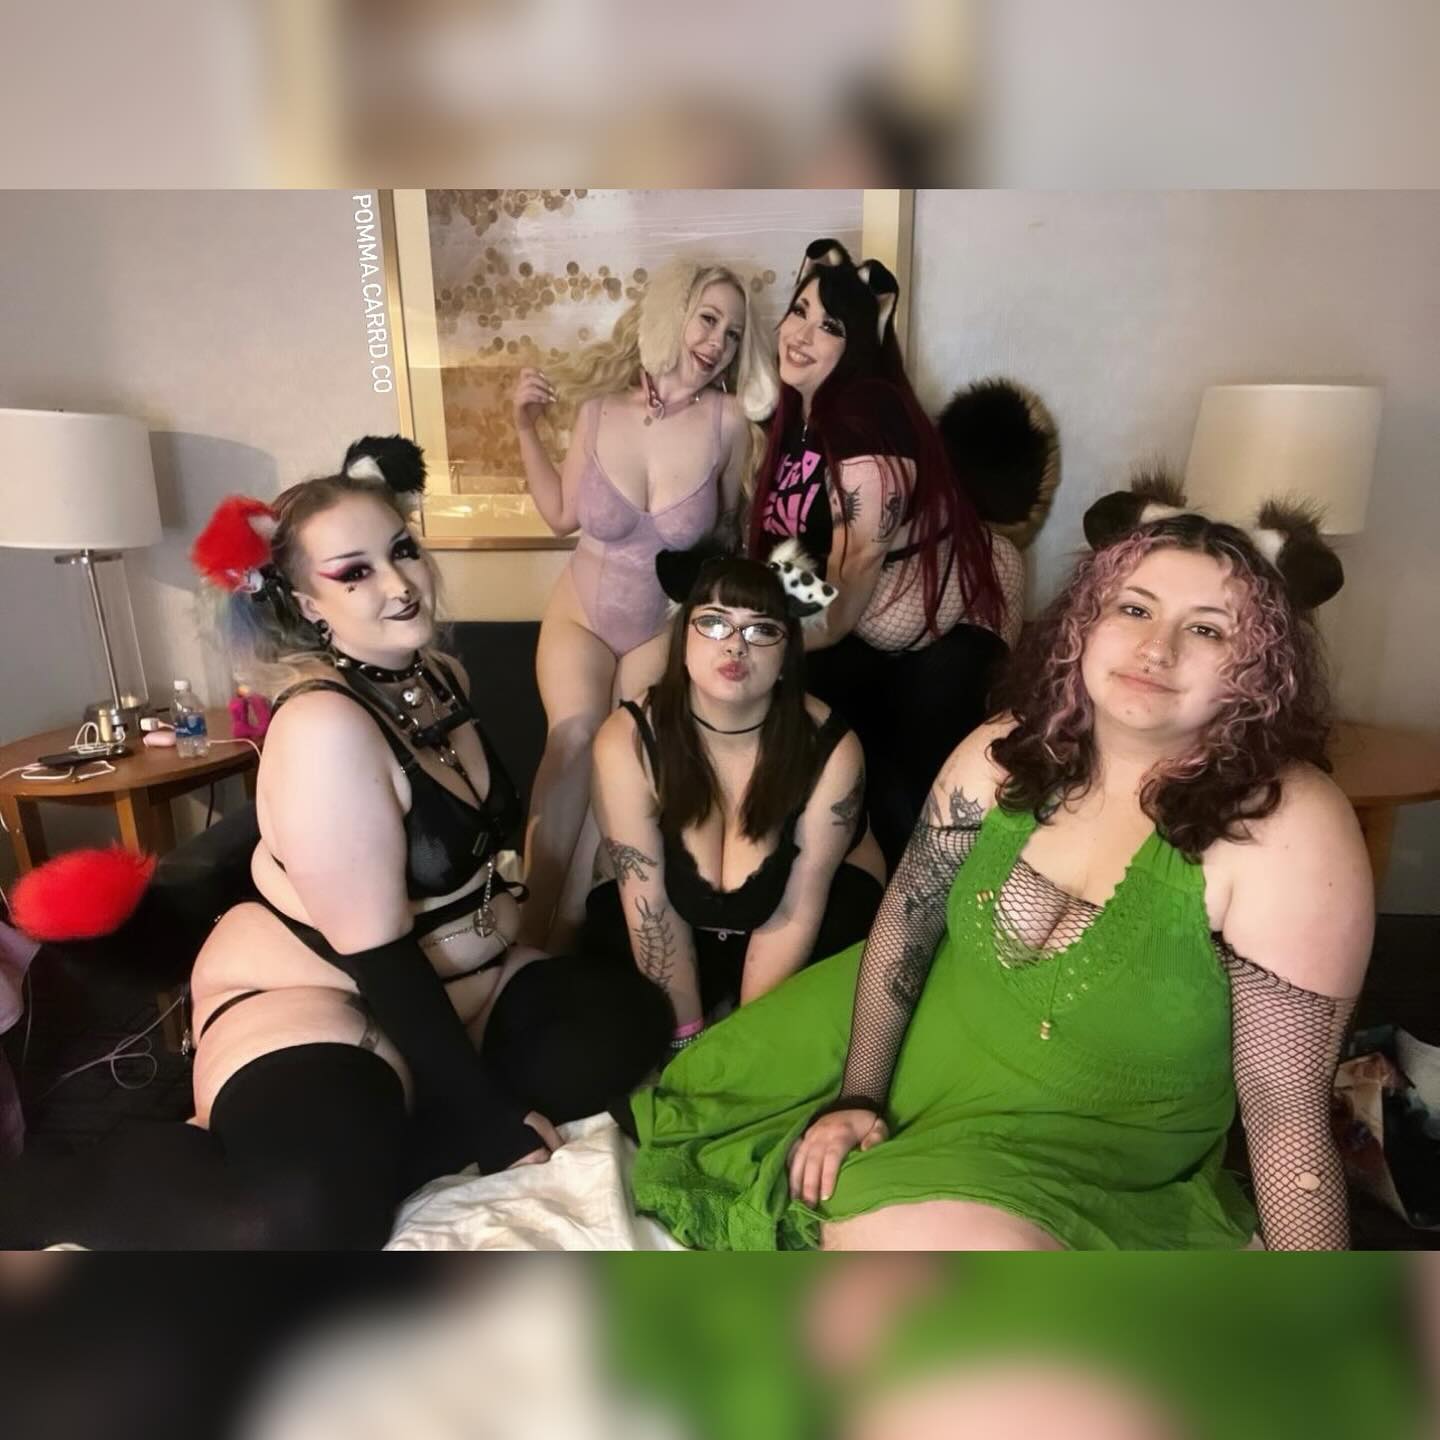 Your favorite puppies barking n playing 😋✨🦴
-
I’m finally getting to editing n queueing from My Exxxotica-Reaf-Pocono endeavors and first up we got some puppyplay with these absolute cuties. I can’t help but be a lil rambunctious sometimes but I promise not to chew up your furniture too bad~ 

Lurk elsewhere 🐕💕
-
-
-
-
-
-
-
#pupplay #pupplaycommunity #pupplayfetish #instagood #chicago #exxxotica #thick #goddess #paws #pawsome #tattoos #piercings #playful #kinkmemes #group #belly #thickthighs #tunmy #tailwag